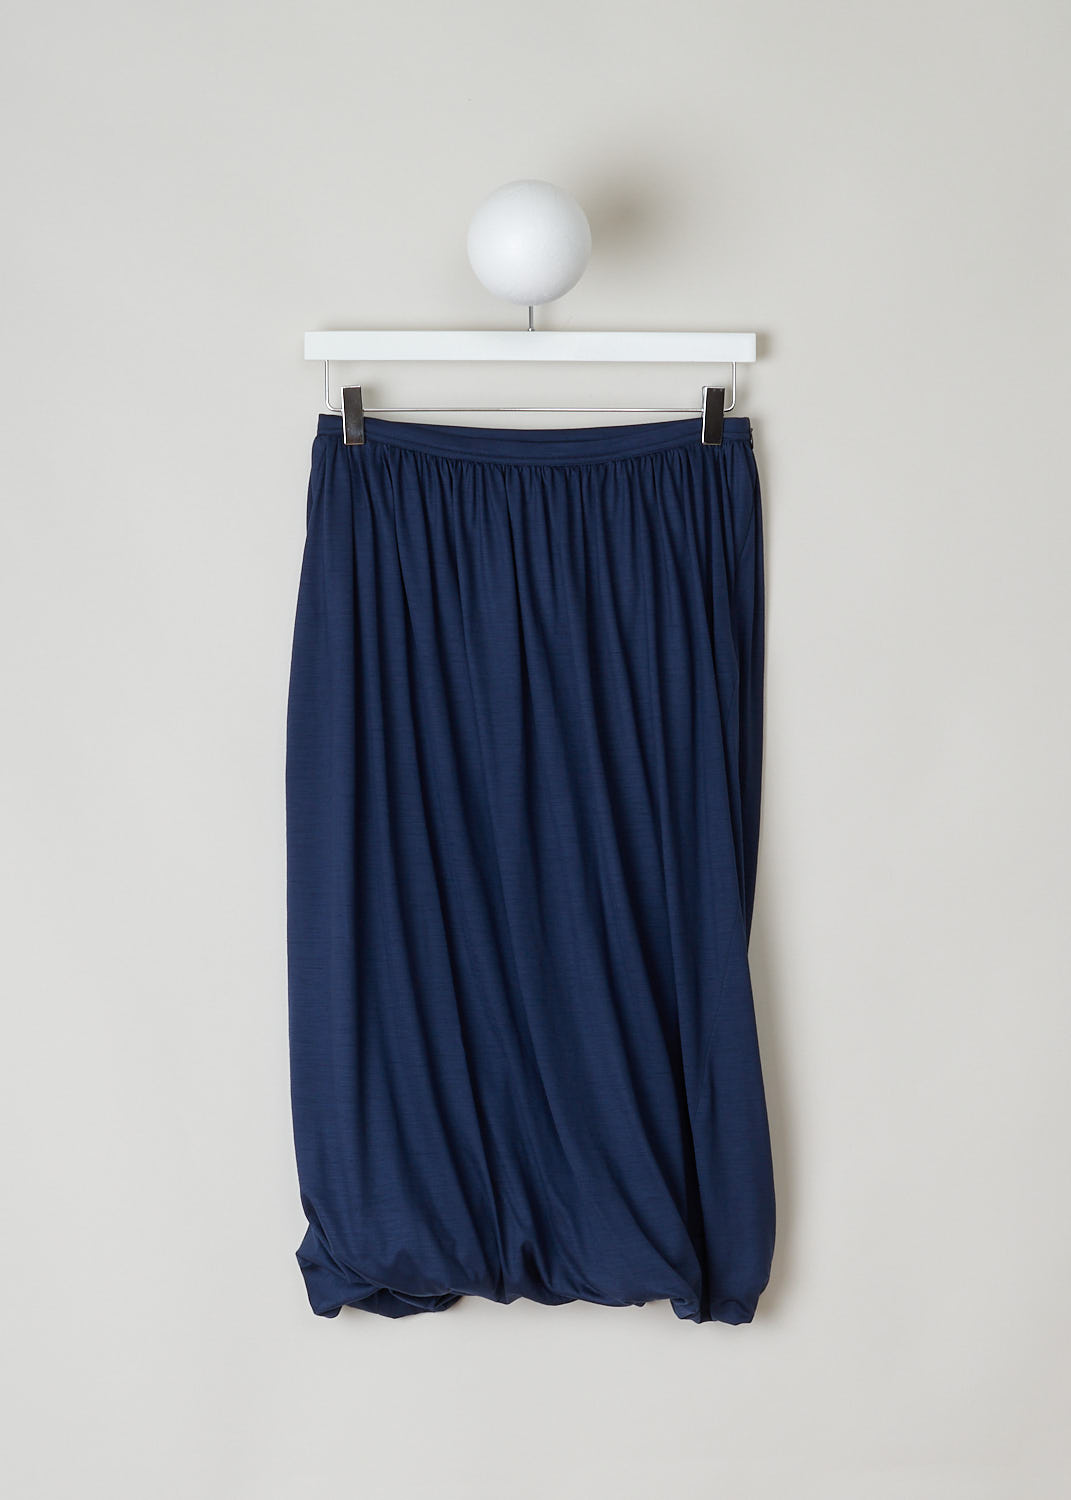 SOFIE Dâ€™HOORE, NAVY BLUE BALLOON SKIRT, SAOLA_WOJE_NAVY, Blue, Front, This twisted balloon skirt in navy blue features a concealed side zip. A single side pocket can be found concealed in the seam.
